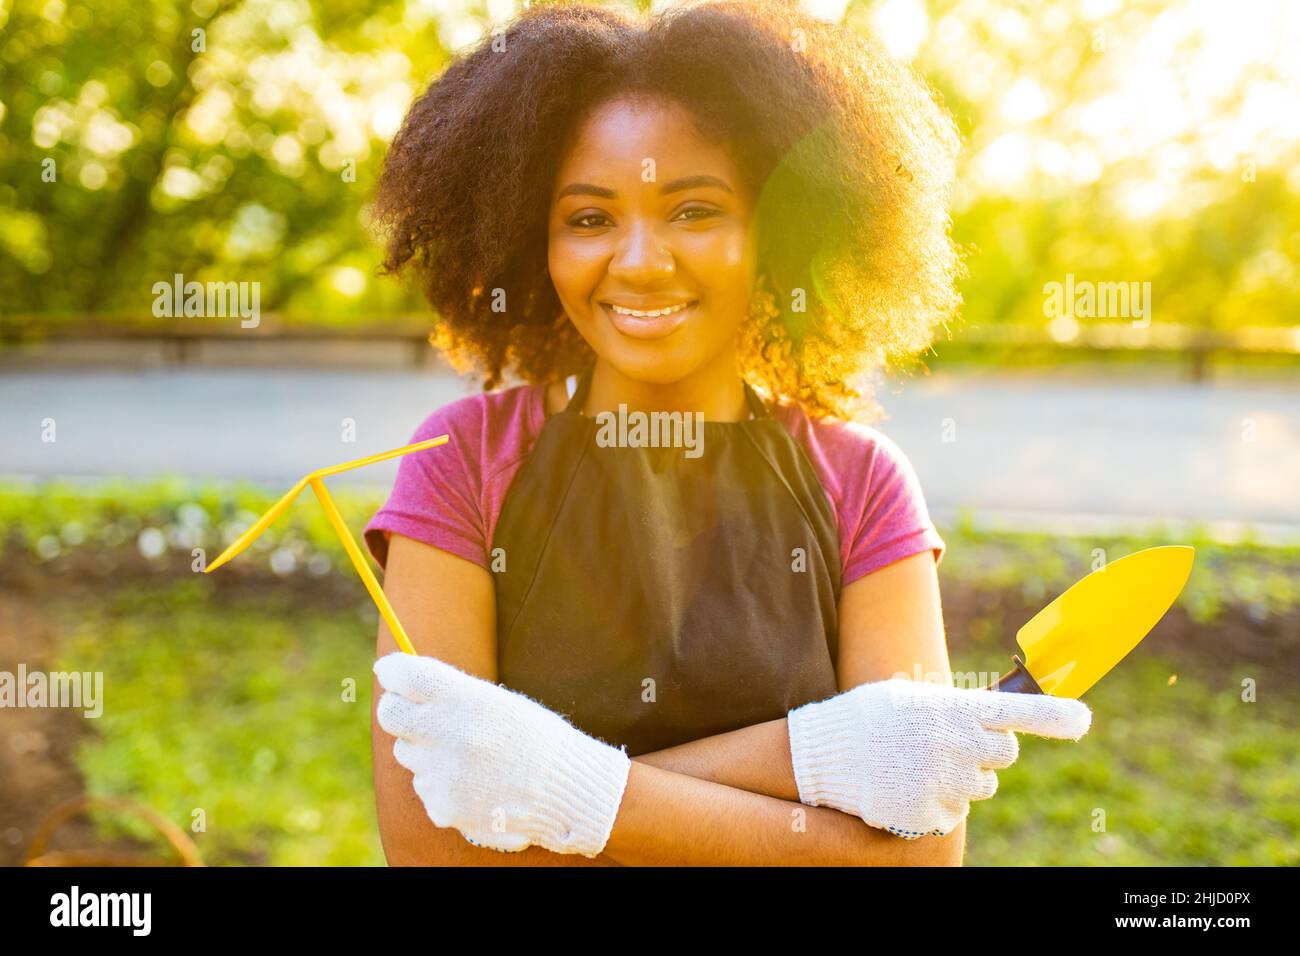 brazilian woman with cool afro curls hairstyle in the garden spring time at sunset Stock Photo